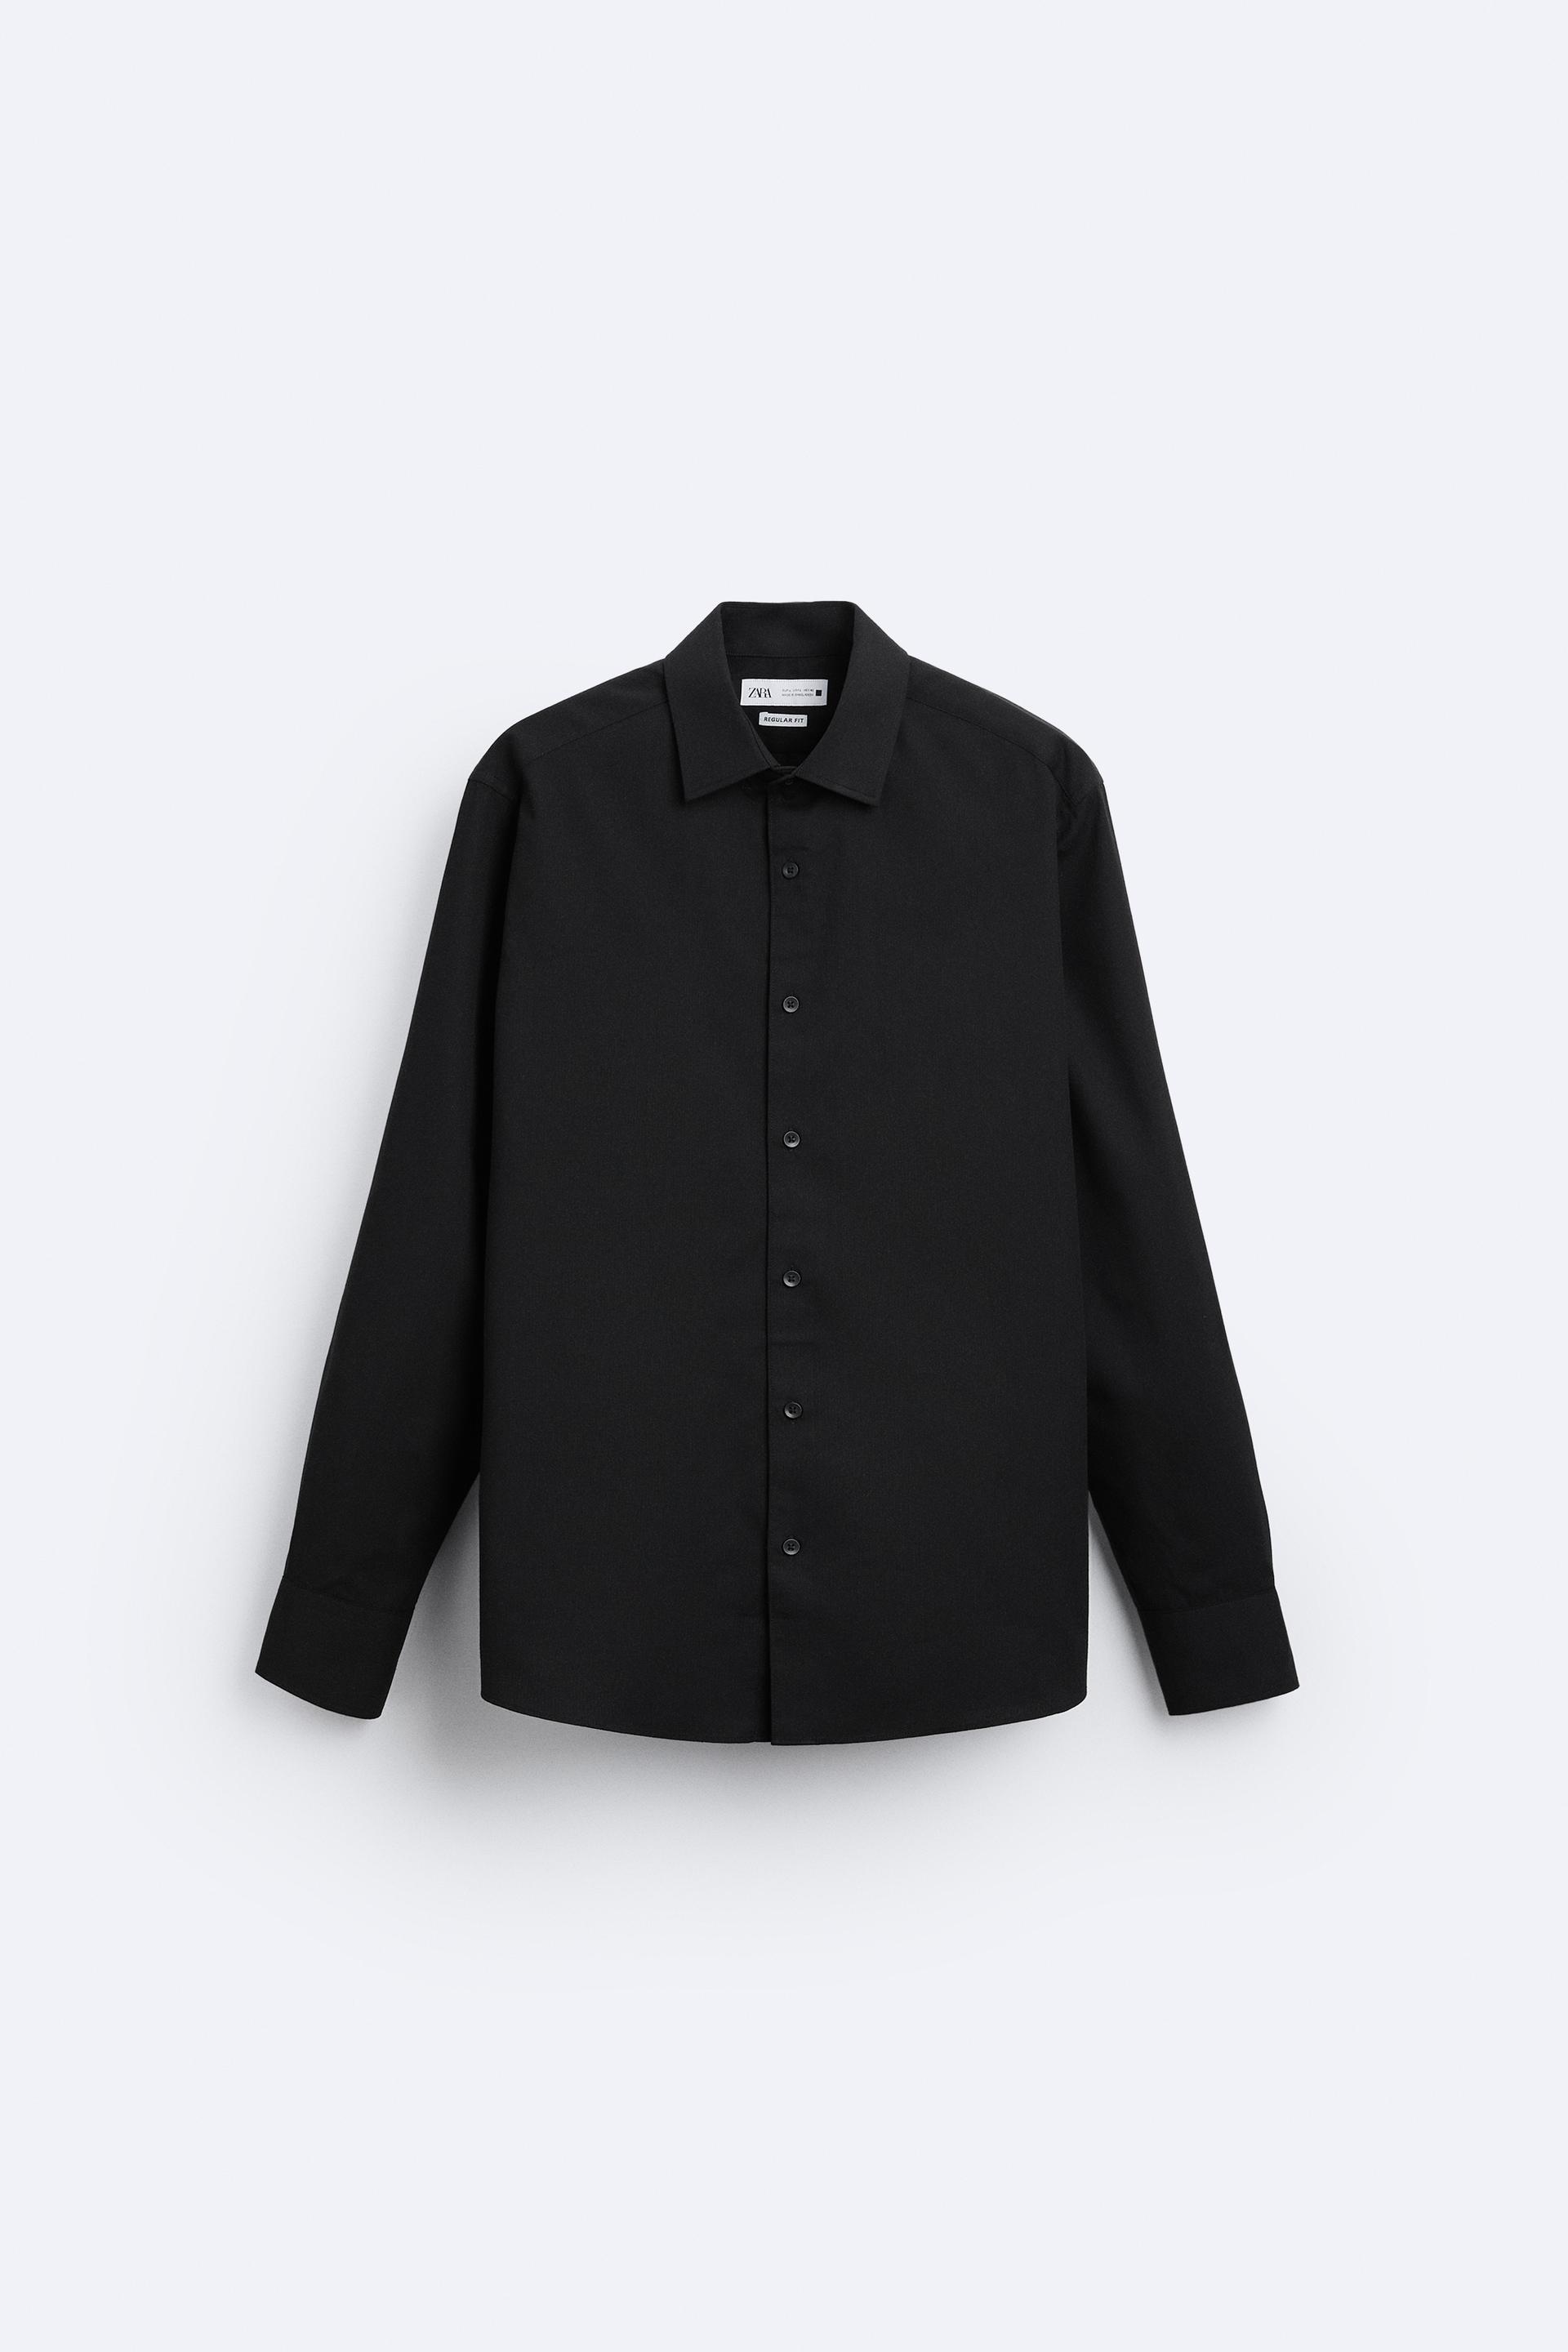 EASY CARE TEXTURED SHIRT - Printed